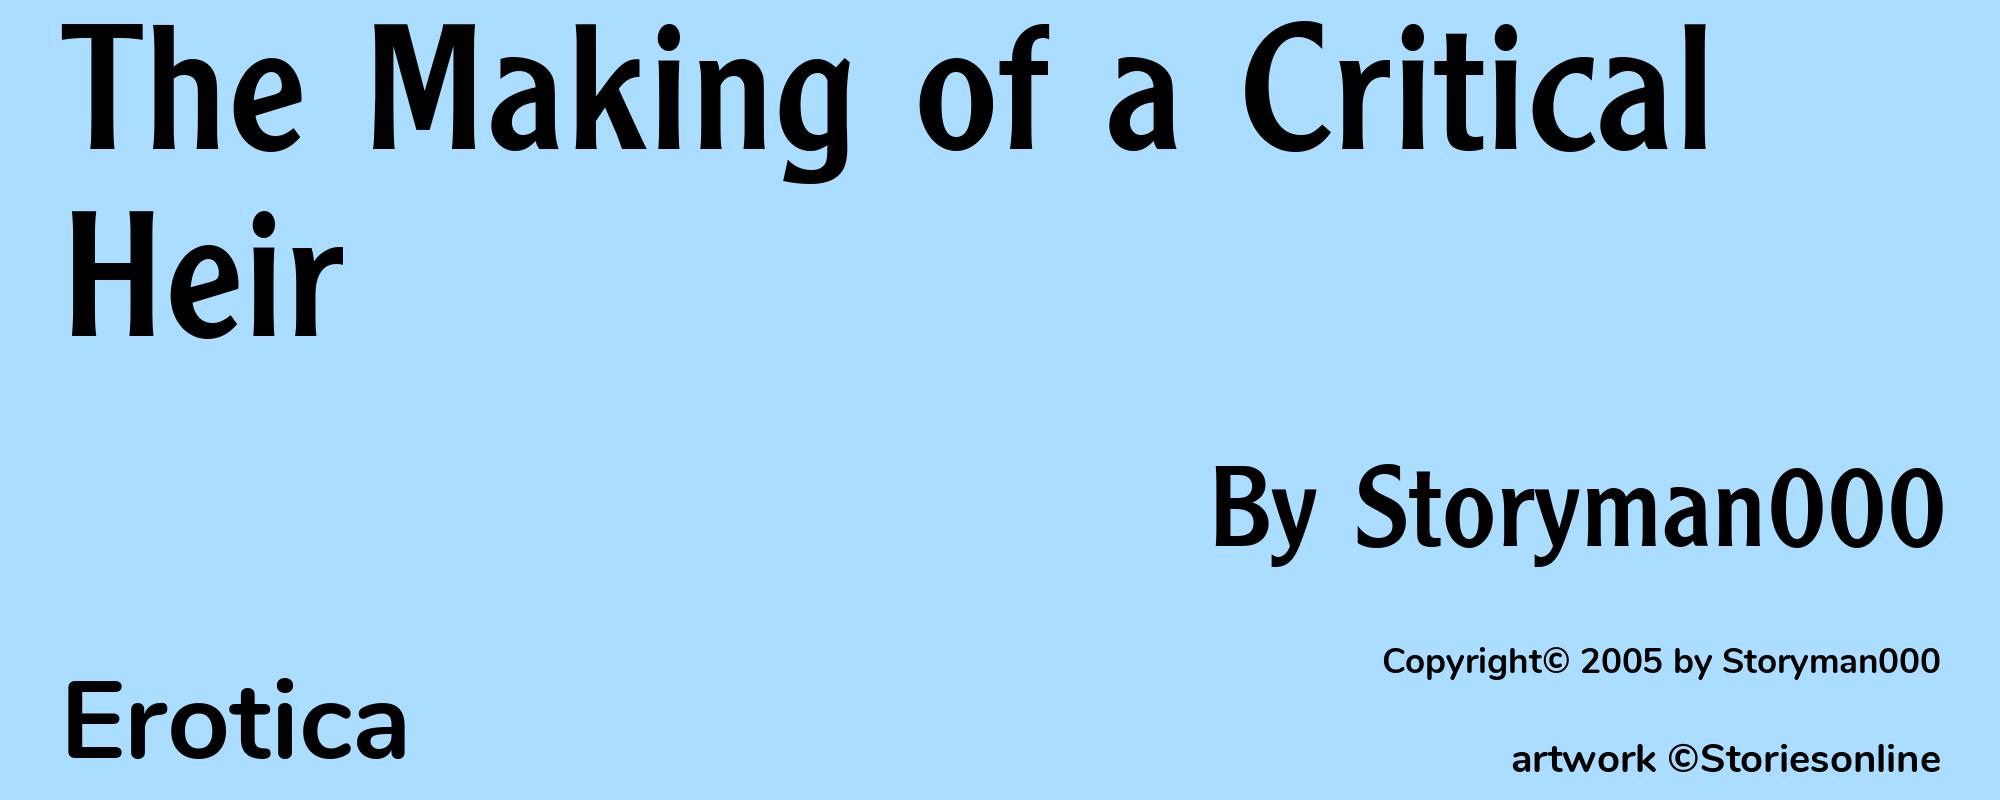 The Making of a Critical Heir - Cover